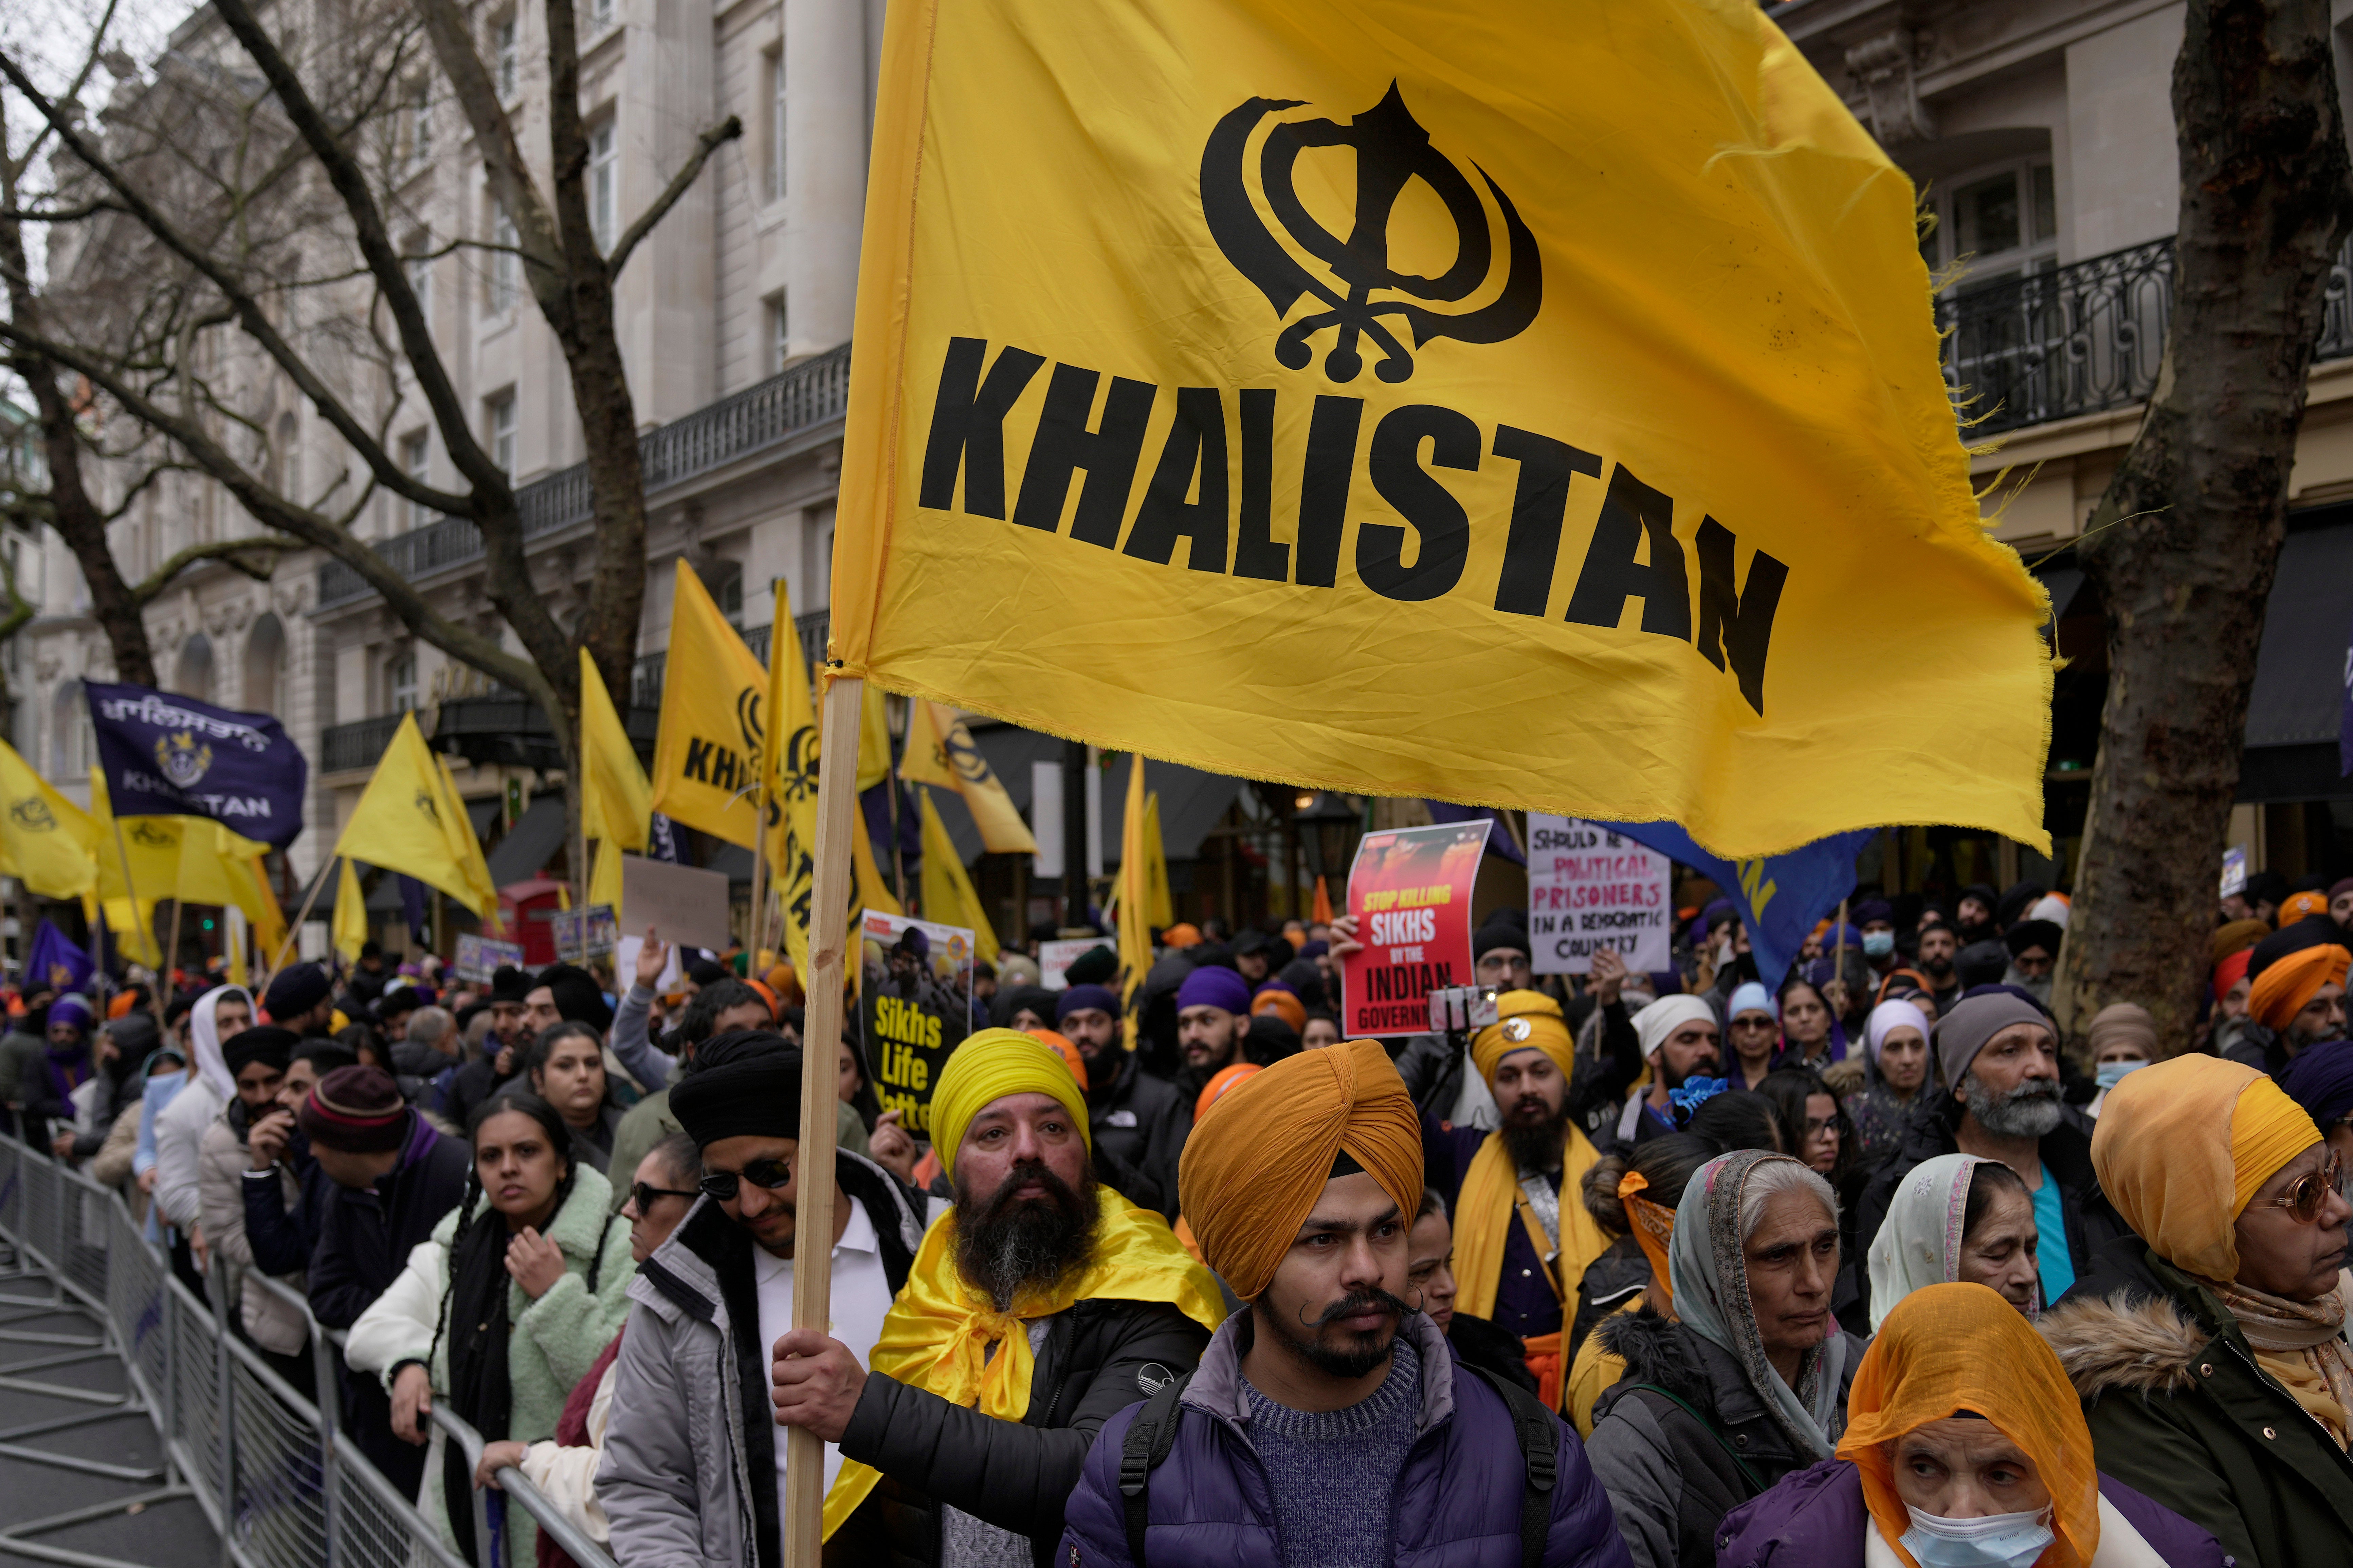 Protestors of the Khalistan movement demonstrate outside of the Indian High Commission in London